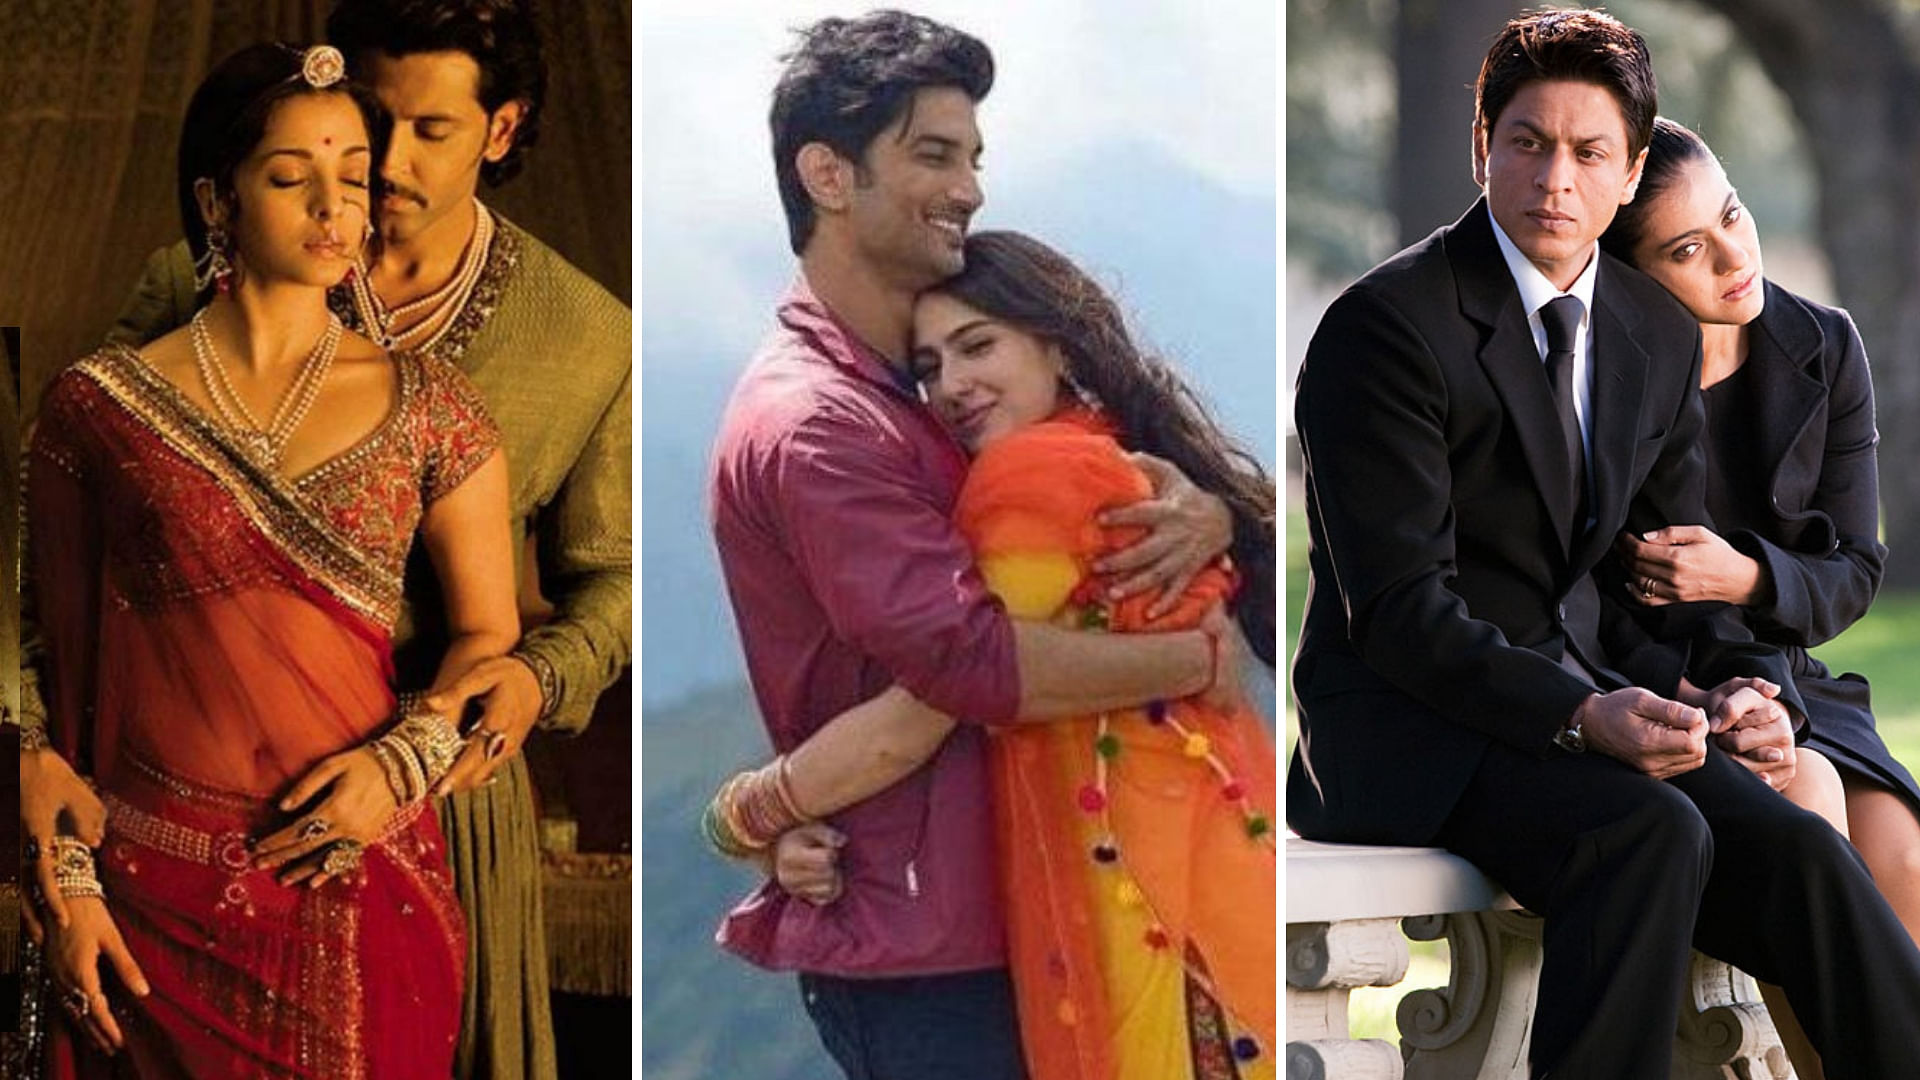 We trace back some of the love stories in Bollywood that dealt with the Hindu-Muslim angle.